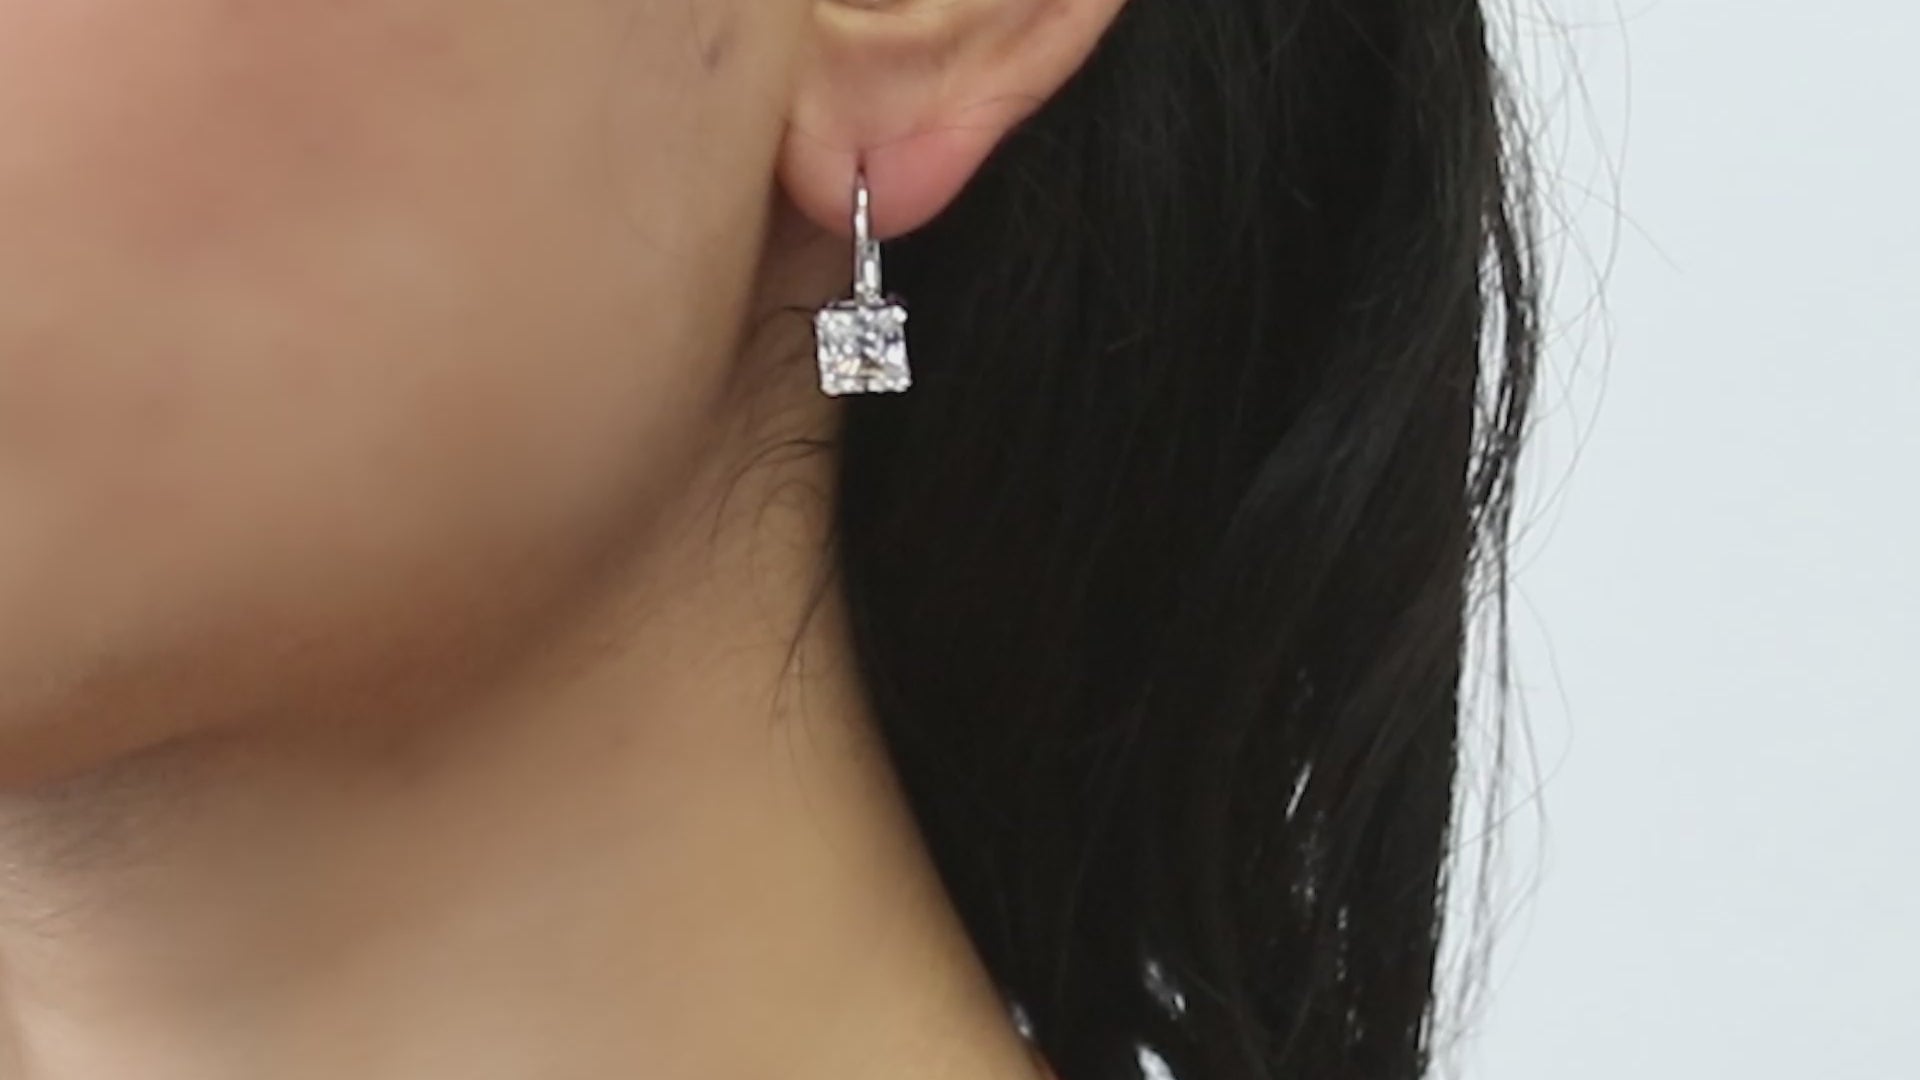 Video Contains Solitaire 4ct Princess CZ Leverback Dangle Earrings in Sterling Silver. Style Number E1250